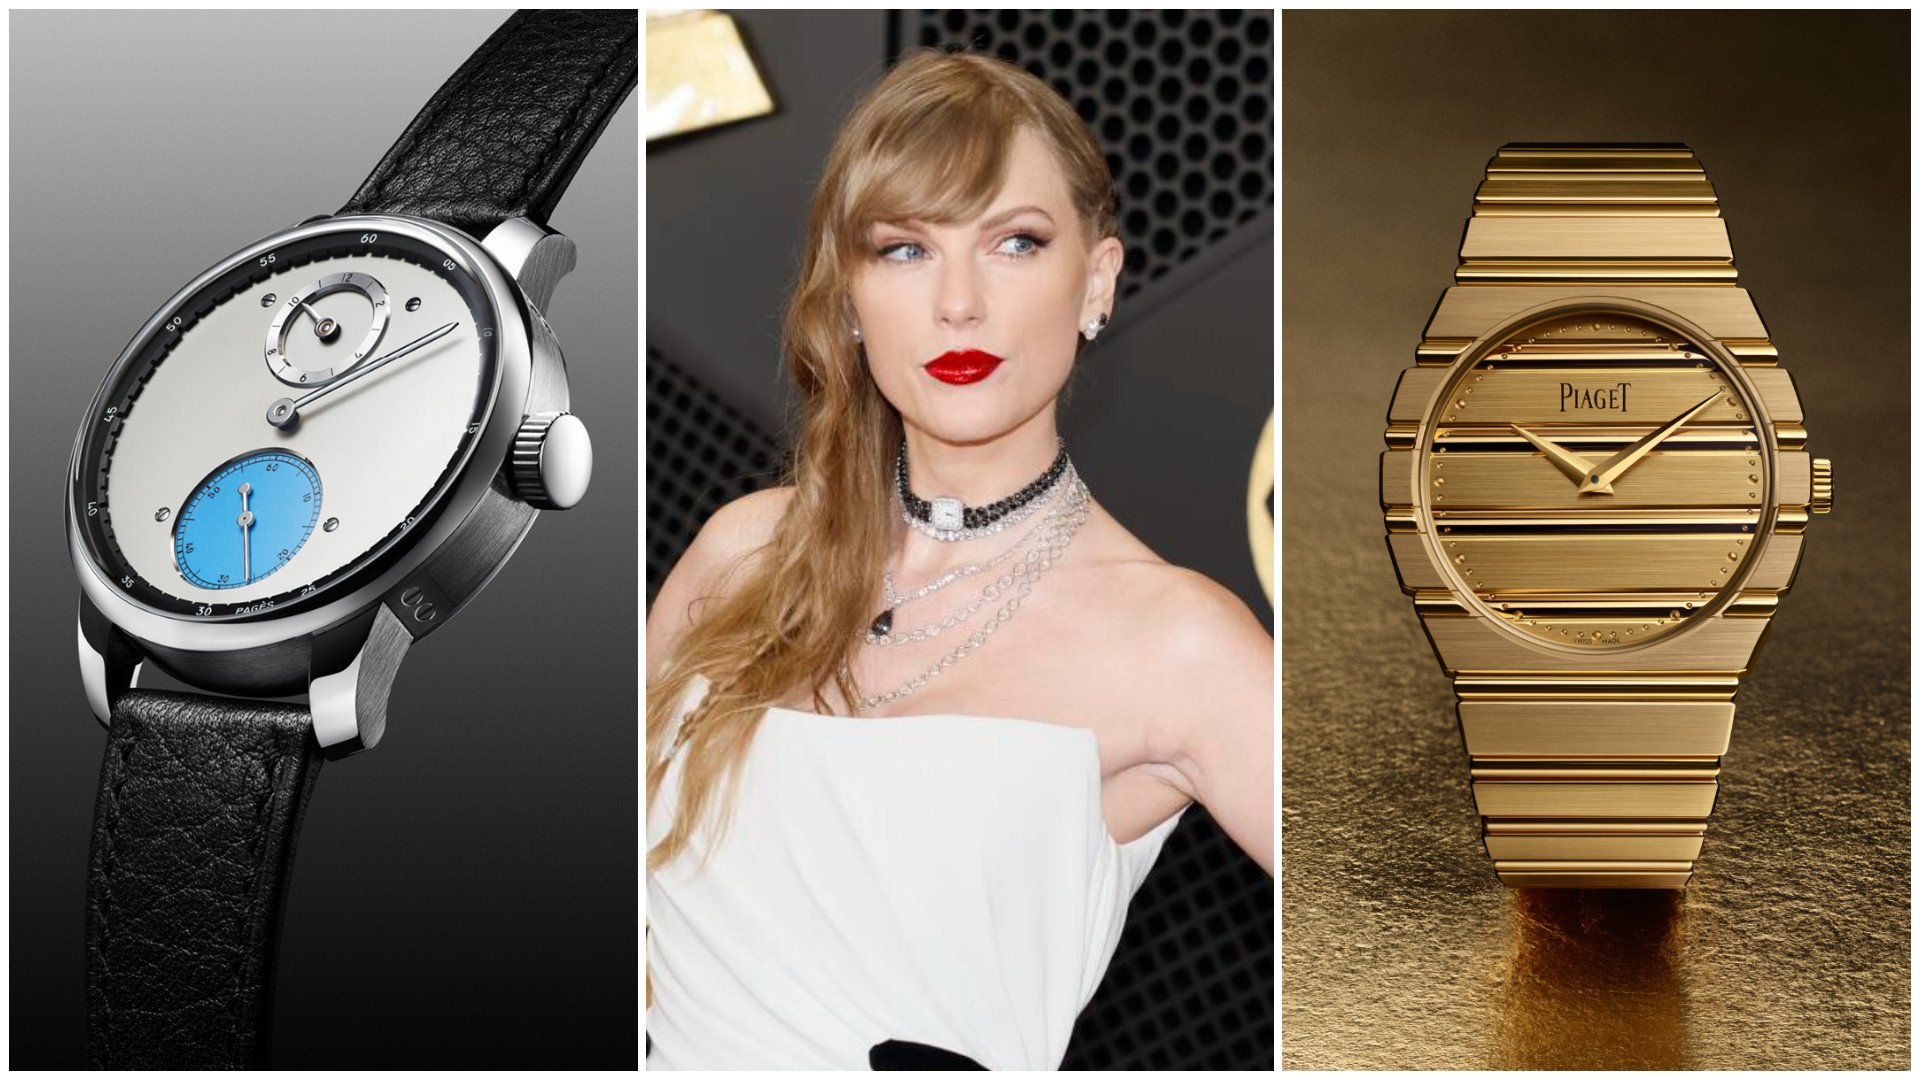 From left to right: Raul Pages’ RP1 Regulateur a Detente wins the inaugural Louis Vuitton Watch Prize for Independent Creatives; Taylor Swift wears a custom Lorraine Schwartz watch choker to the Grammy Awards; Piaget throws it back by releasing the Polo 79. Photos: Handout